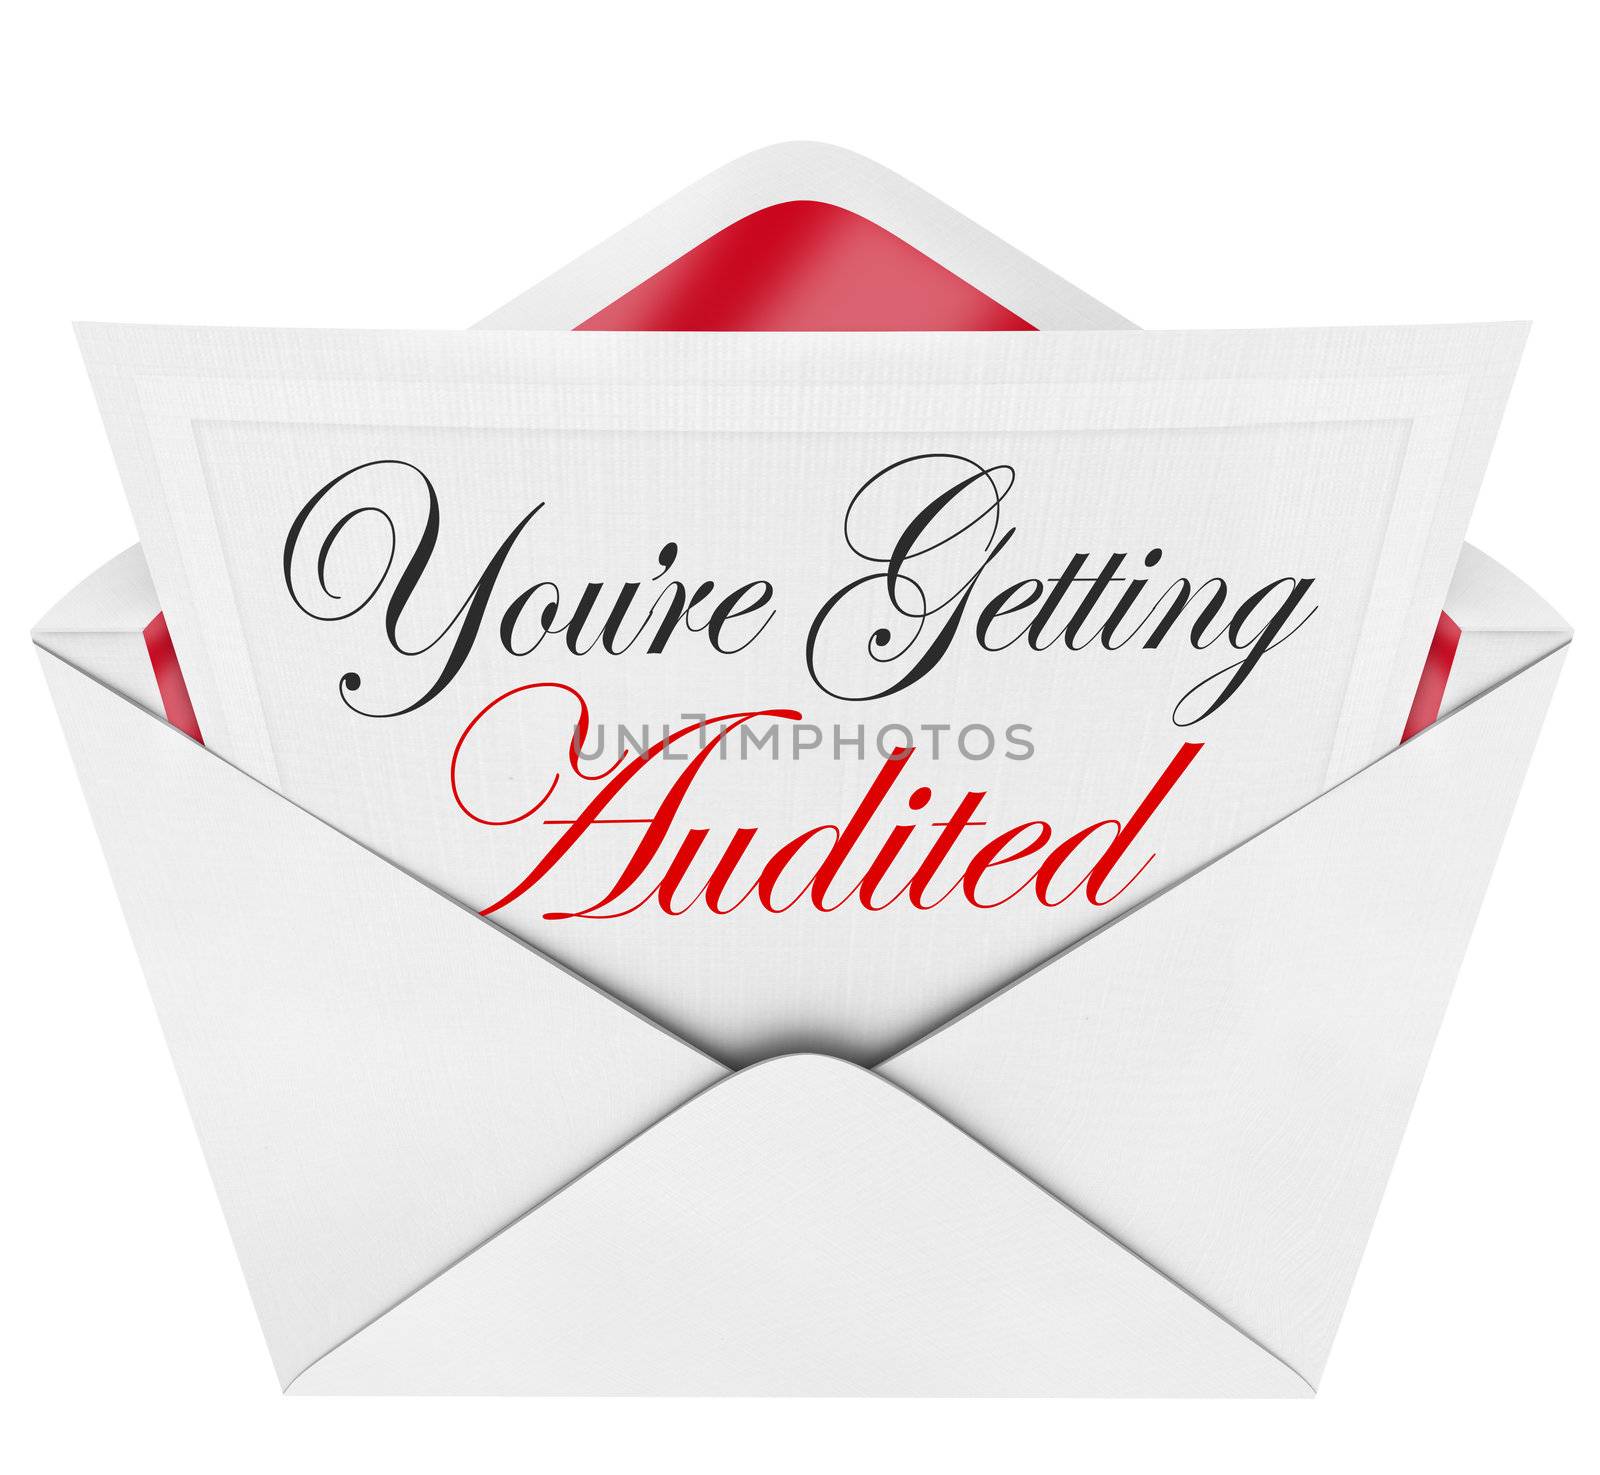 You're Getting Audited - Envelope Formal Invitation Notice by iQoncept